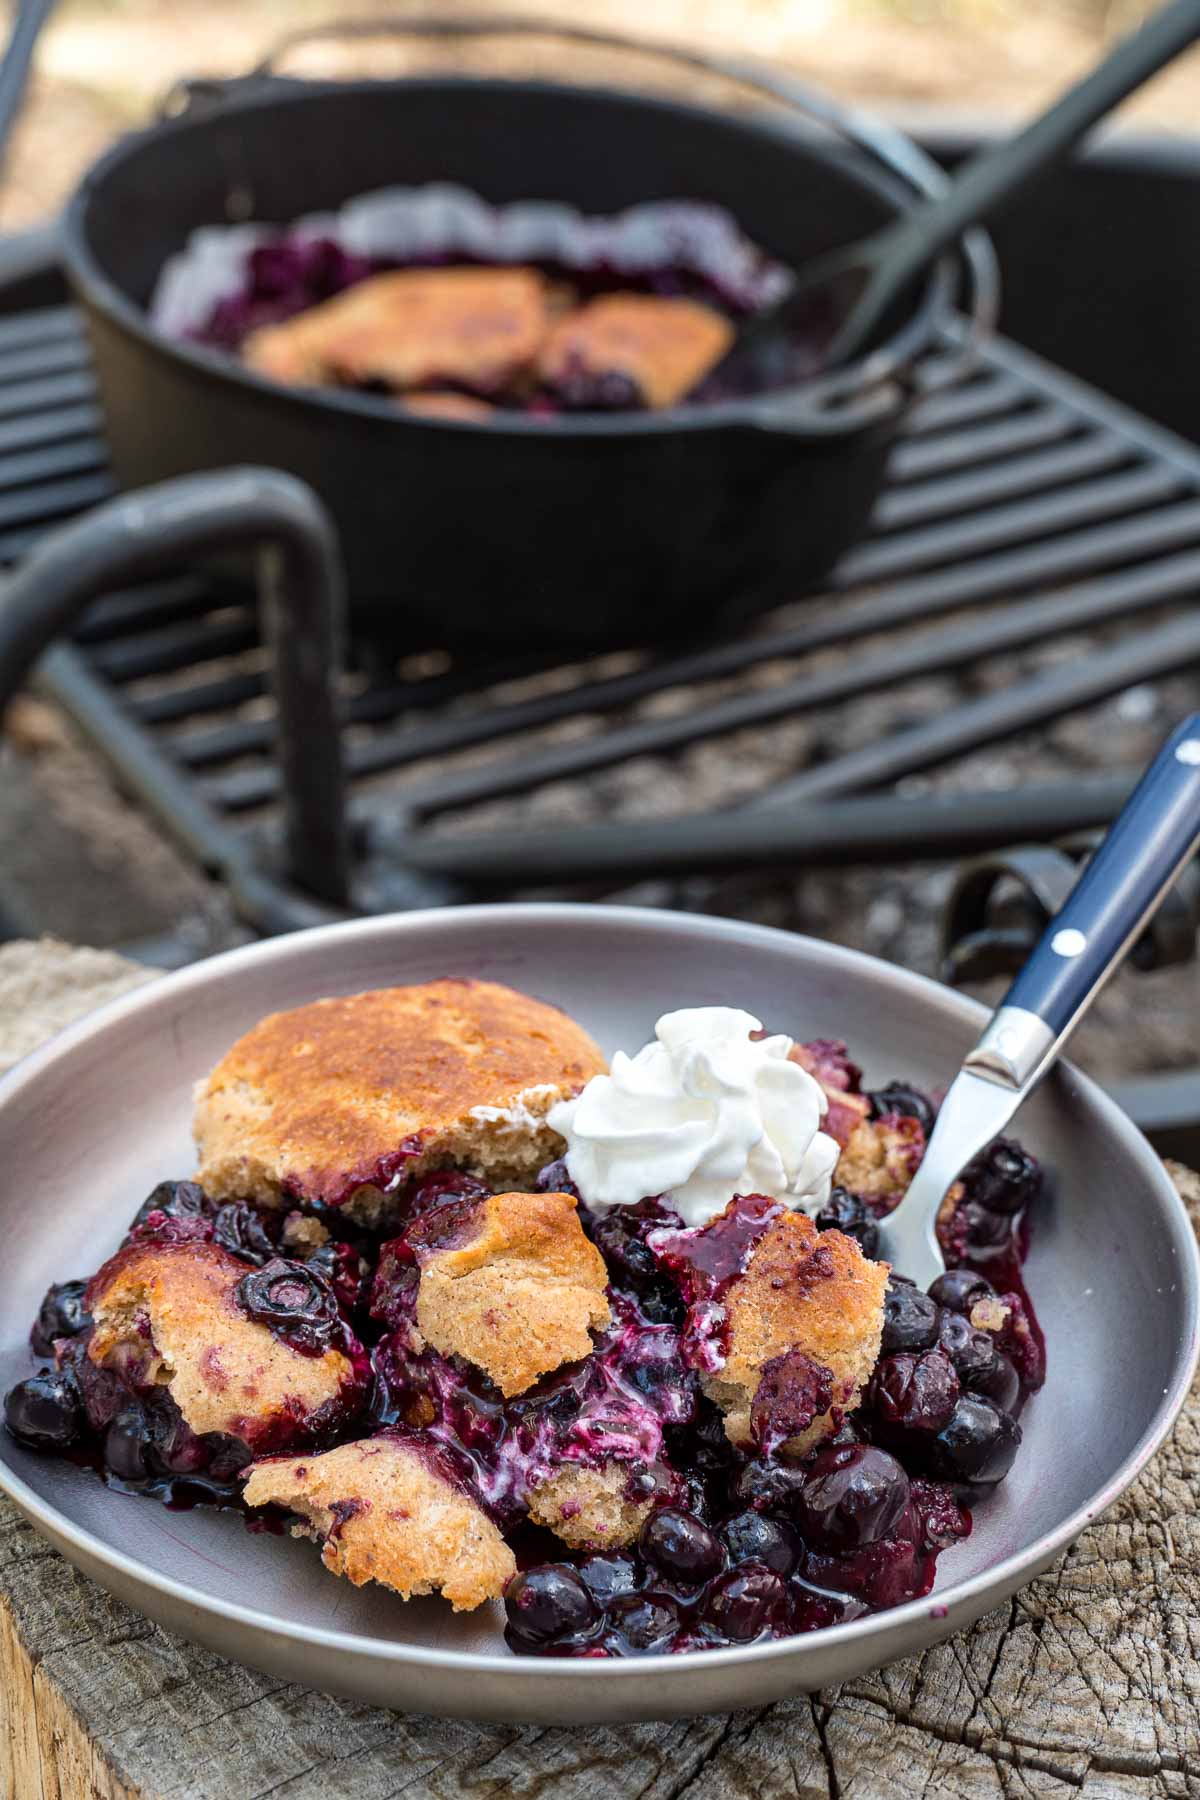 Blueberry cobbler and whipped cream on a plate with a dutch oven in the background